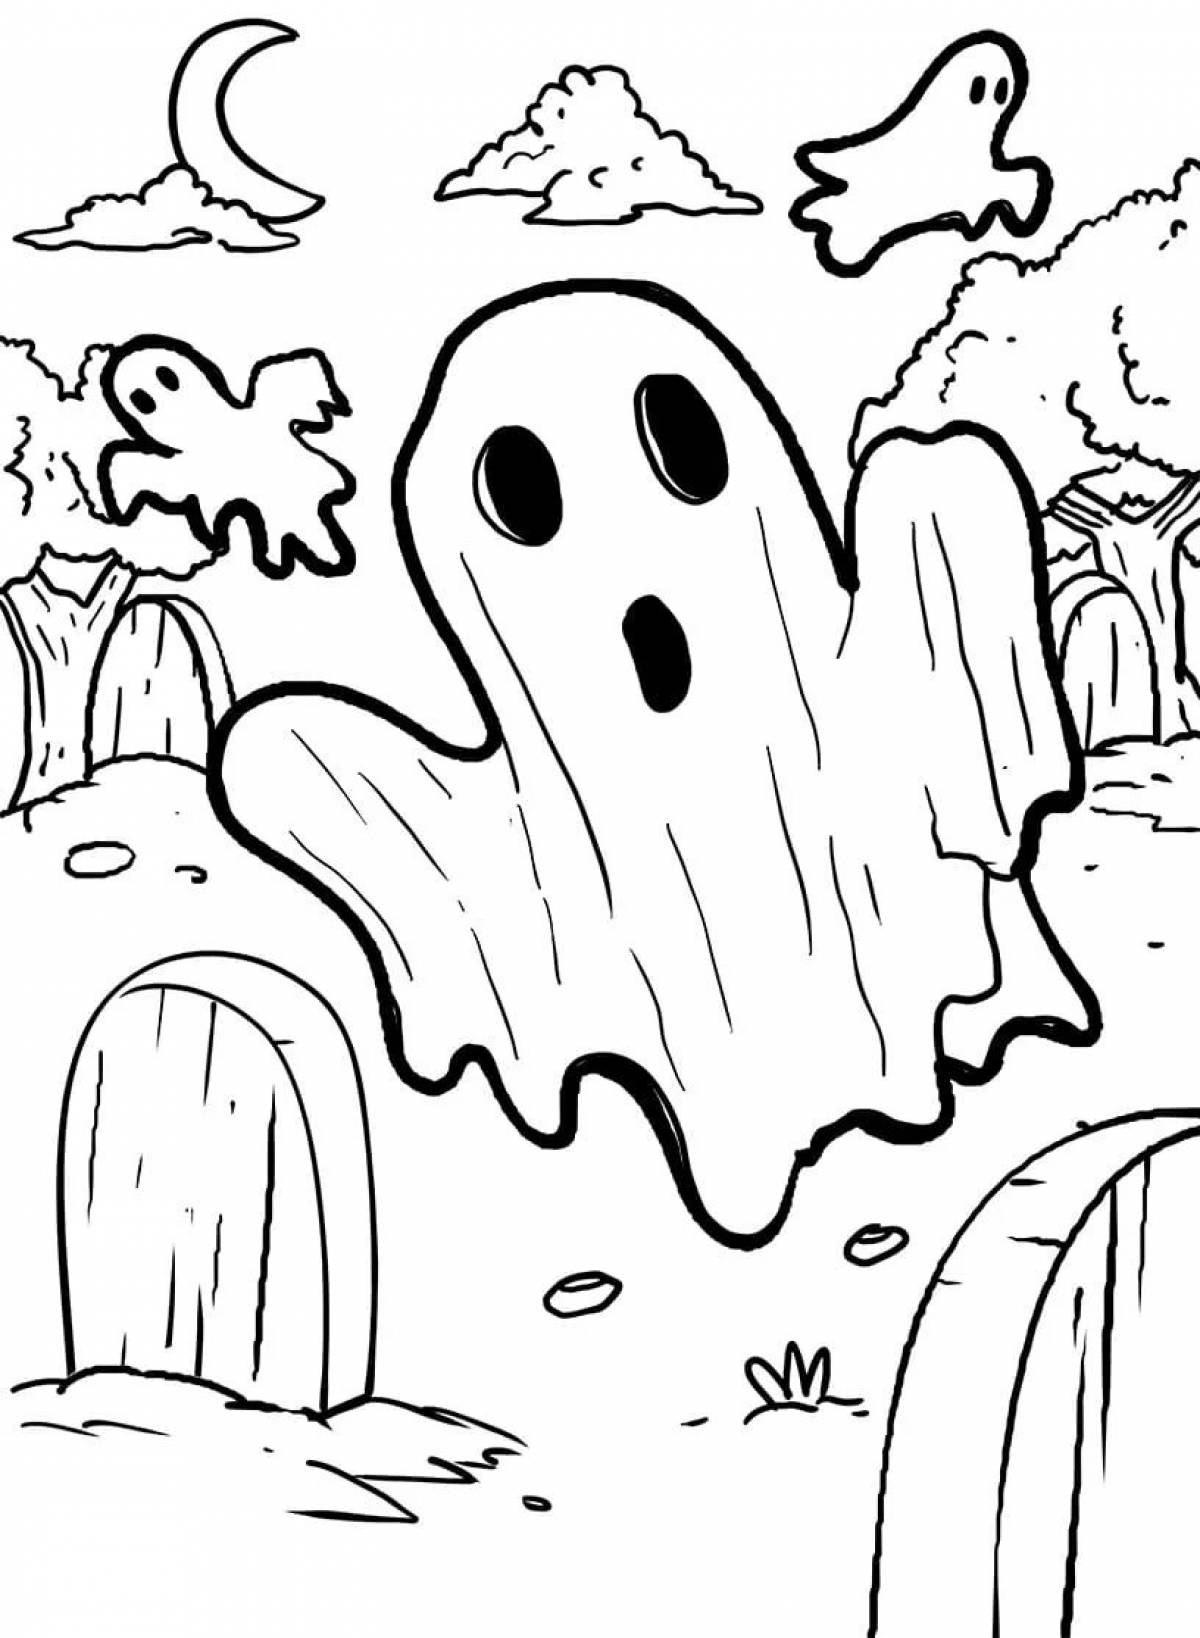 Ghost #6